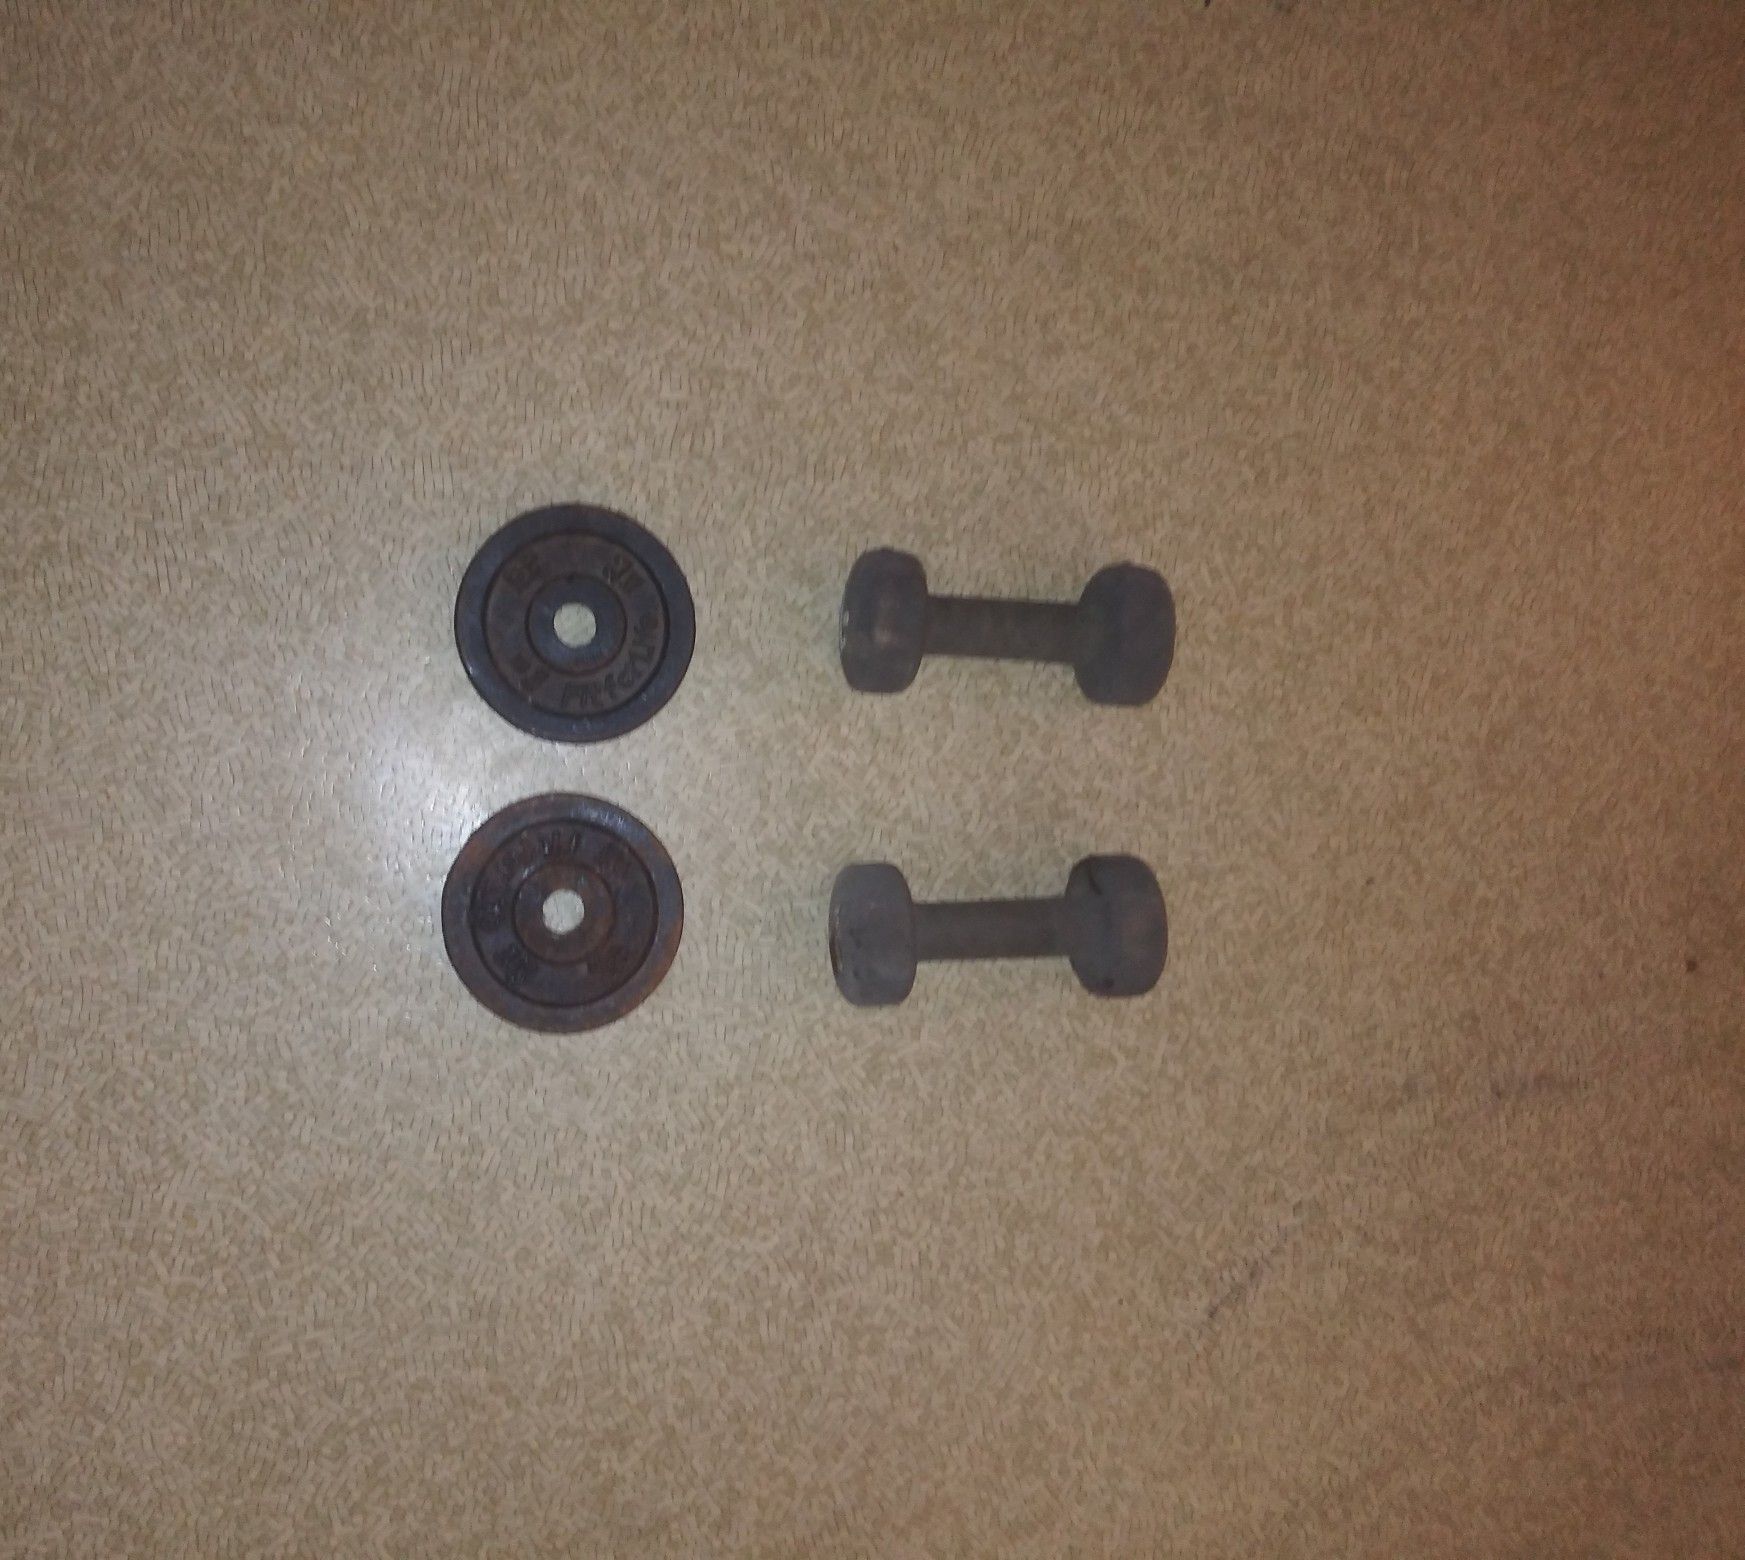 Dumbells/Free weights